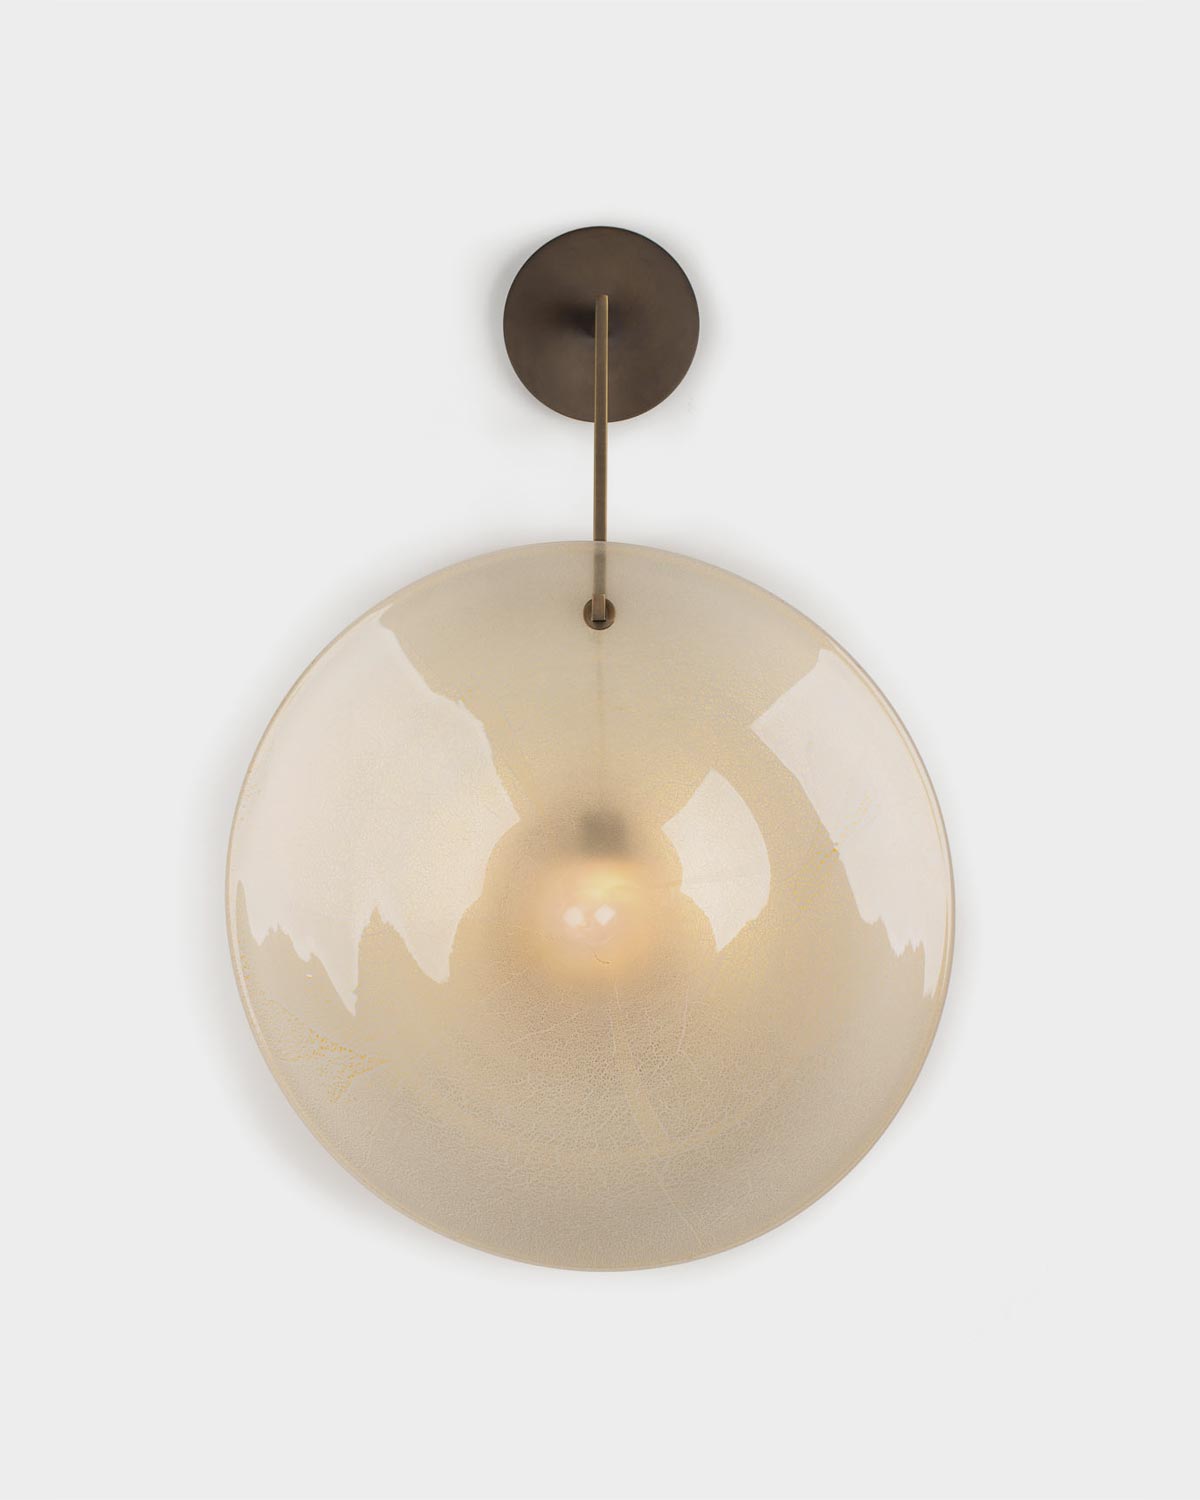 The Orbe Wall Sconce by Veronese